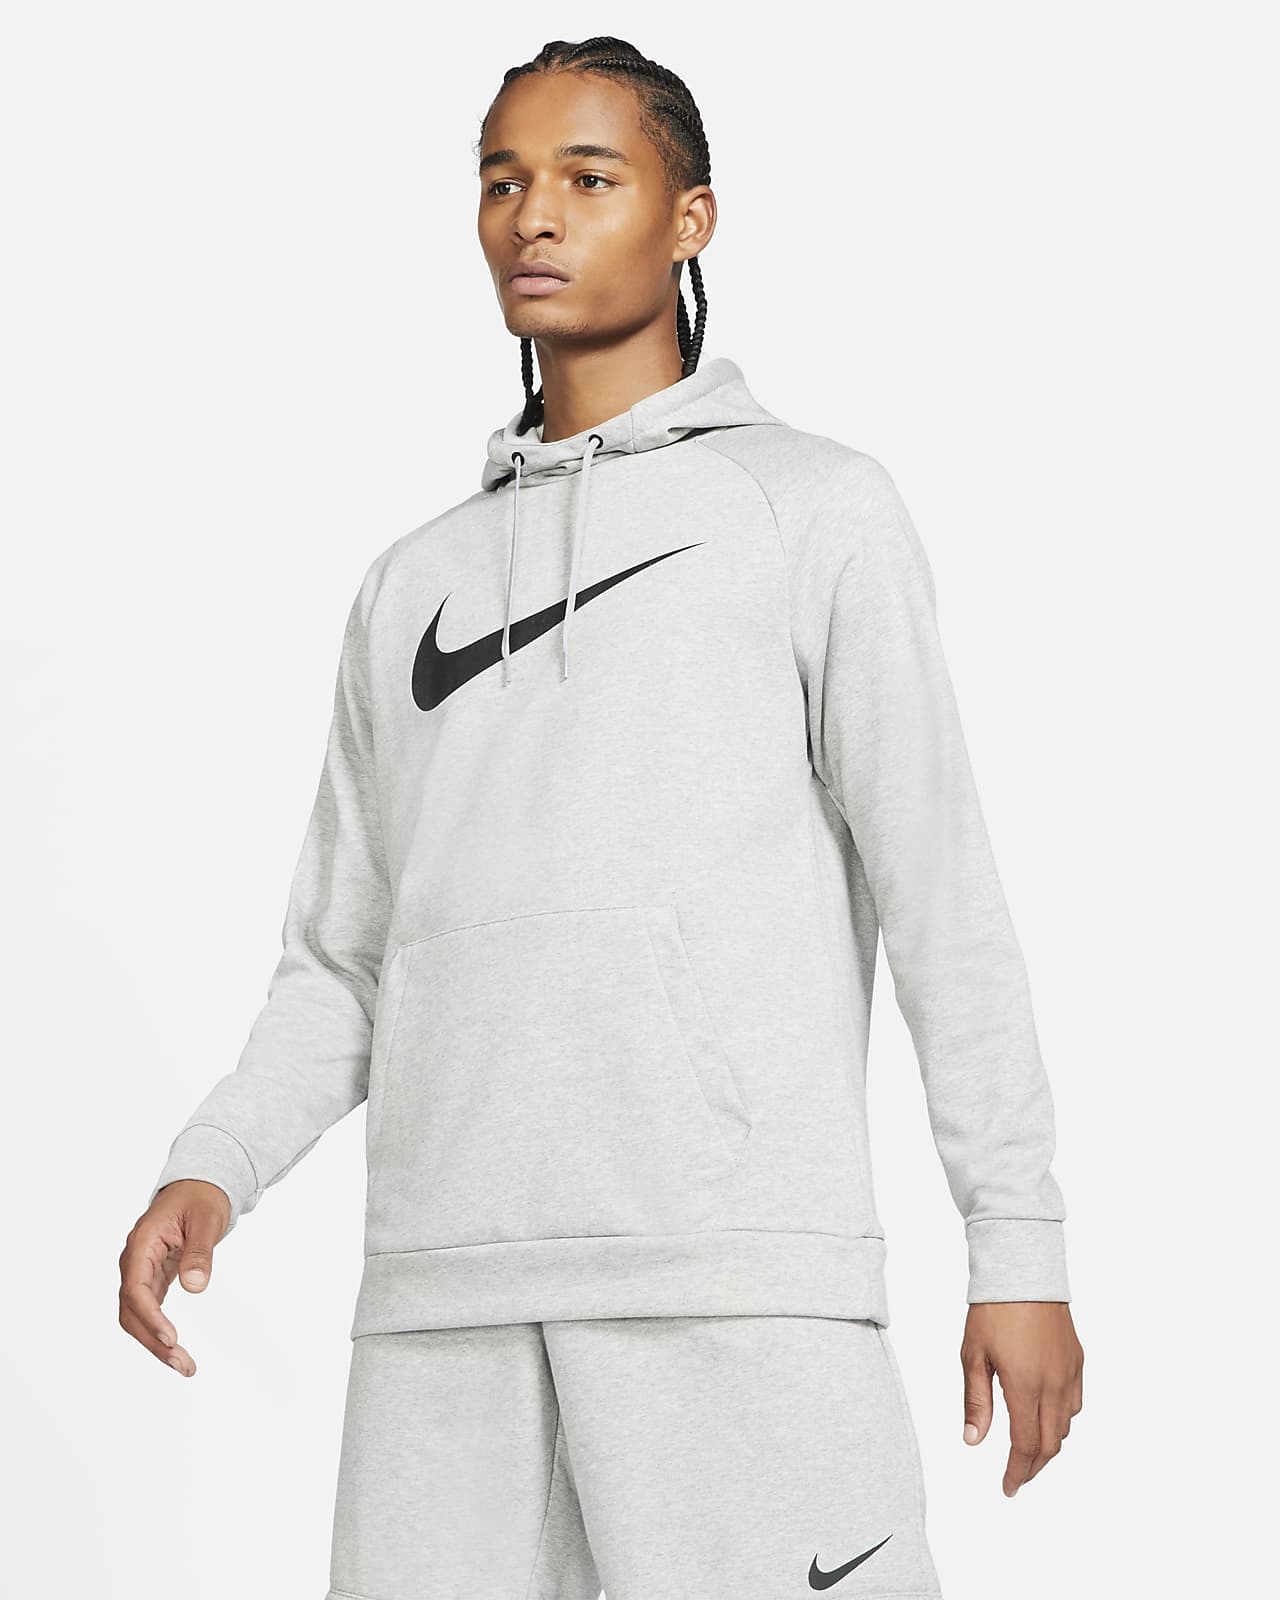 Bezit Republiek Billy Goat Nike Dry Graphic Men's Dri-FIT Hooded Fitness Pullover Hoodie. Nike SE